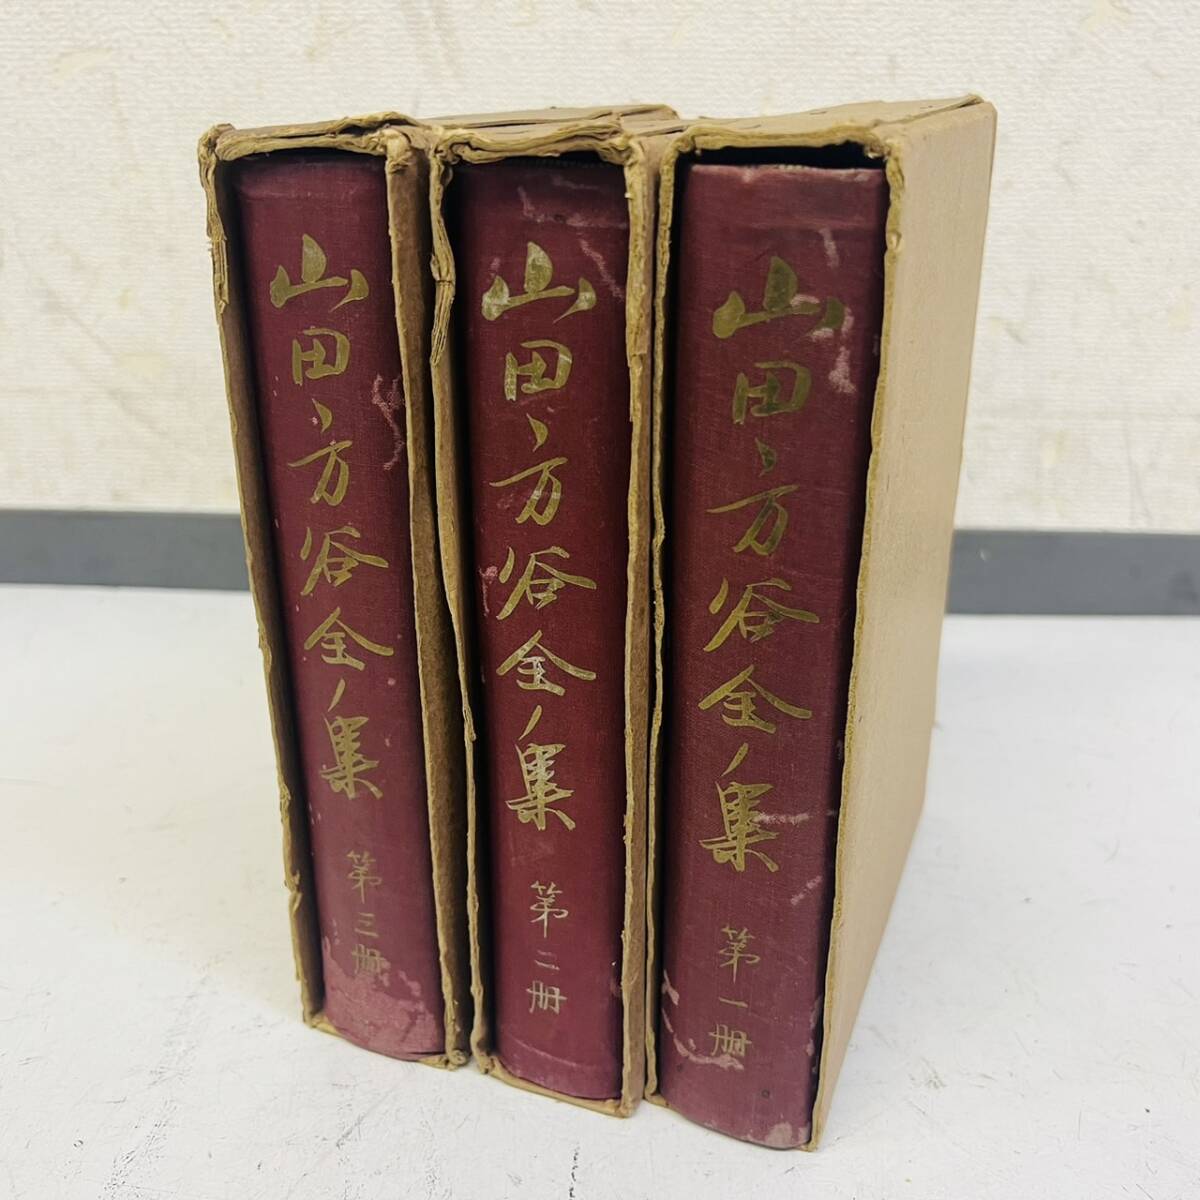 X776-I55-969 mountain rice field person . complete set of works all 3 volume set on rice field bookbinding old book mountain rice field . curtain end . house 